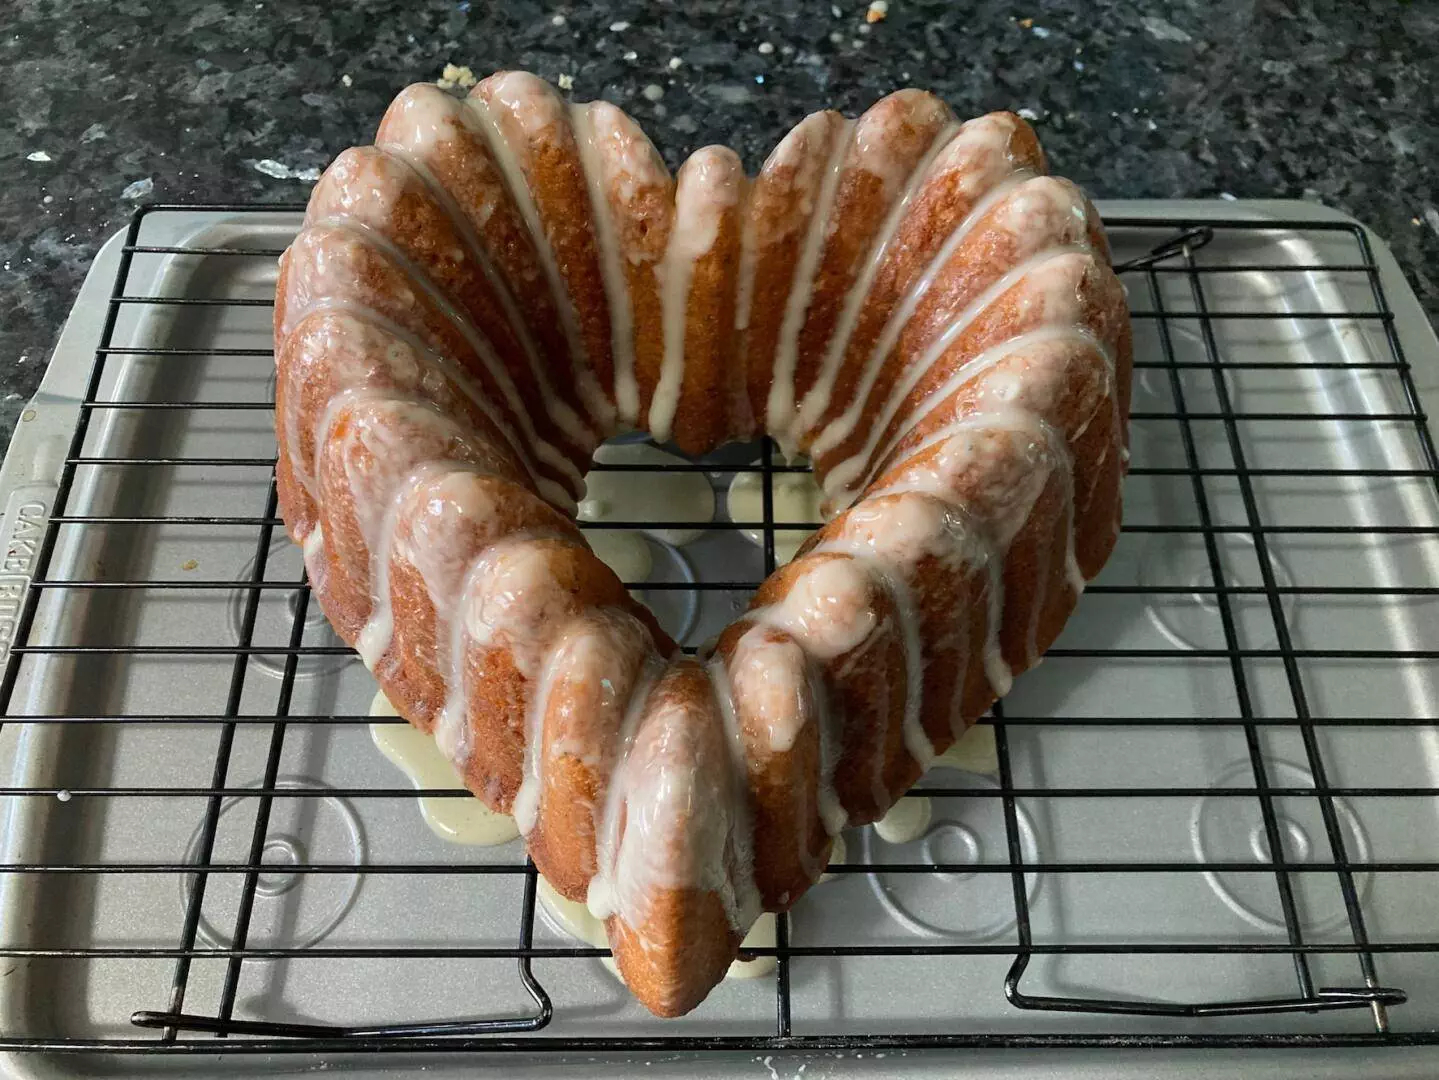 Poppy Seed Cake with Orange Glaze from Out of the Box Baking.com